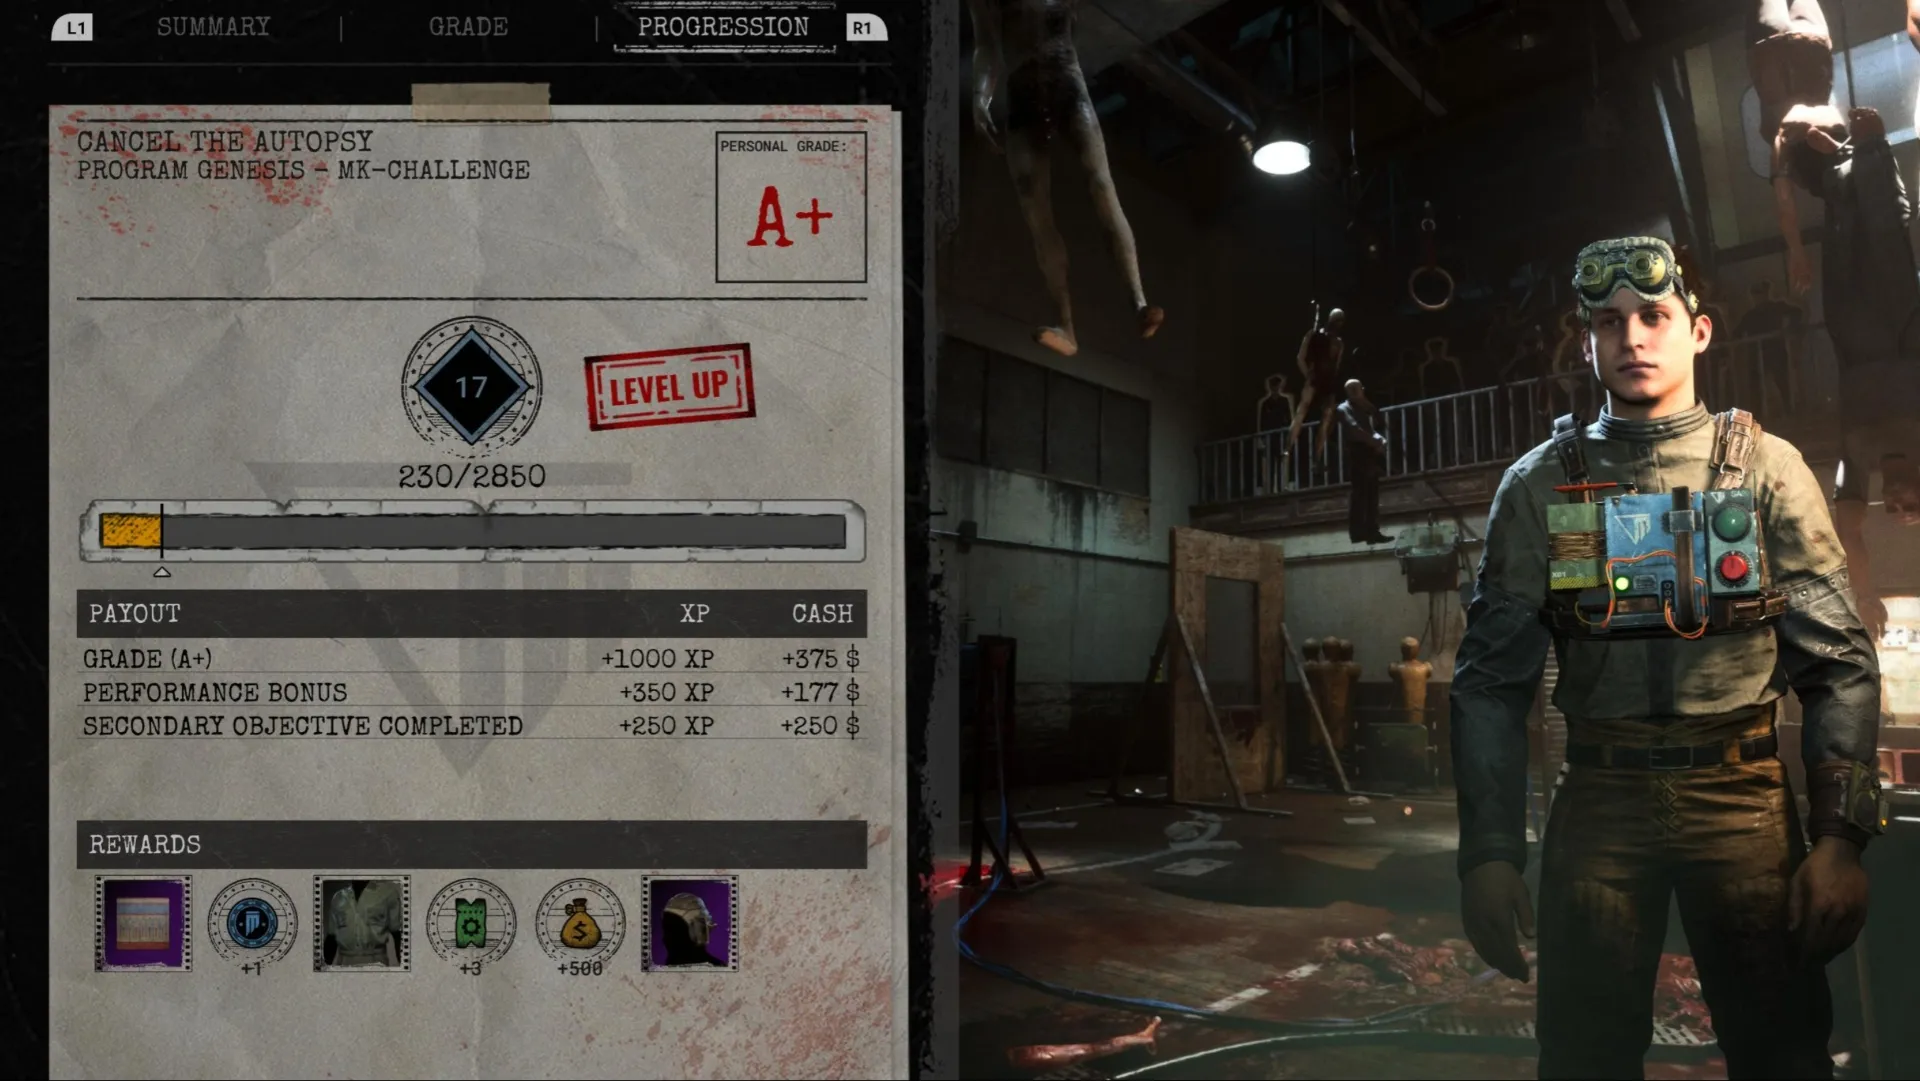 Earning an A+ rank on Cancel The Autopsy, showcasing the rewards earned in The Outlast Trials.